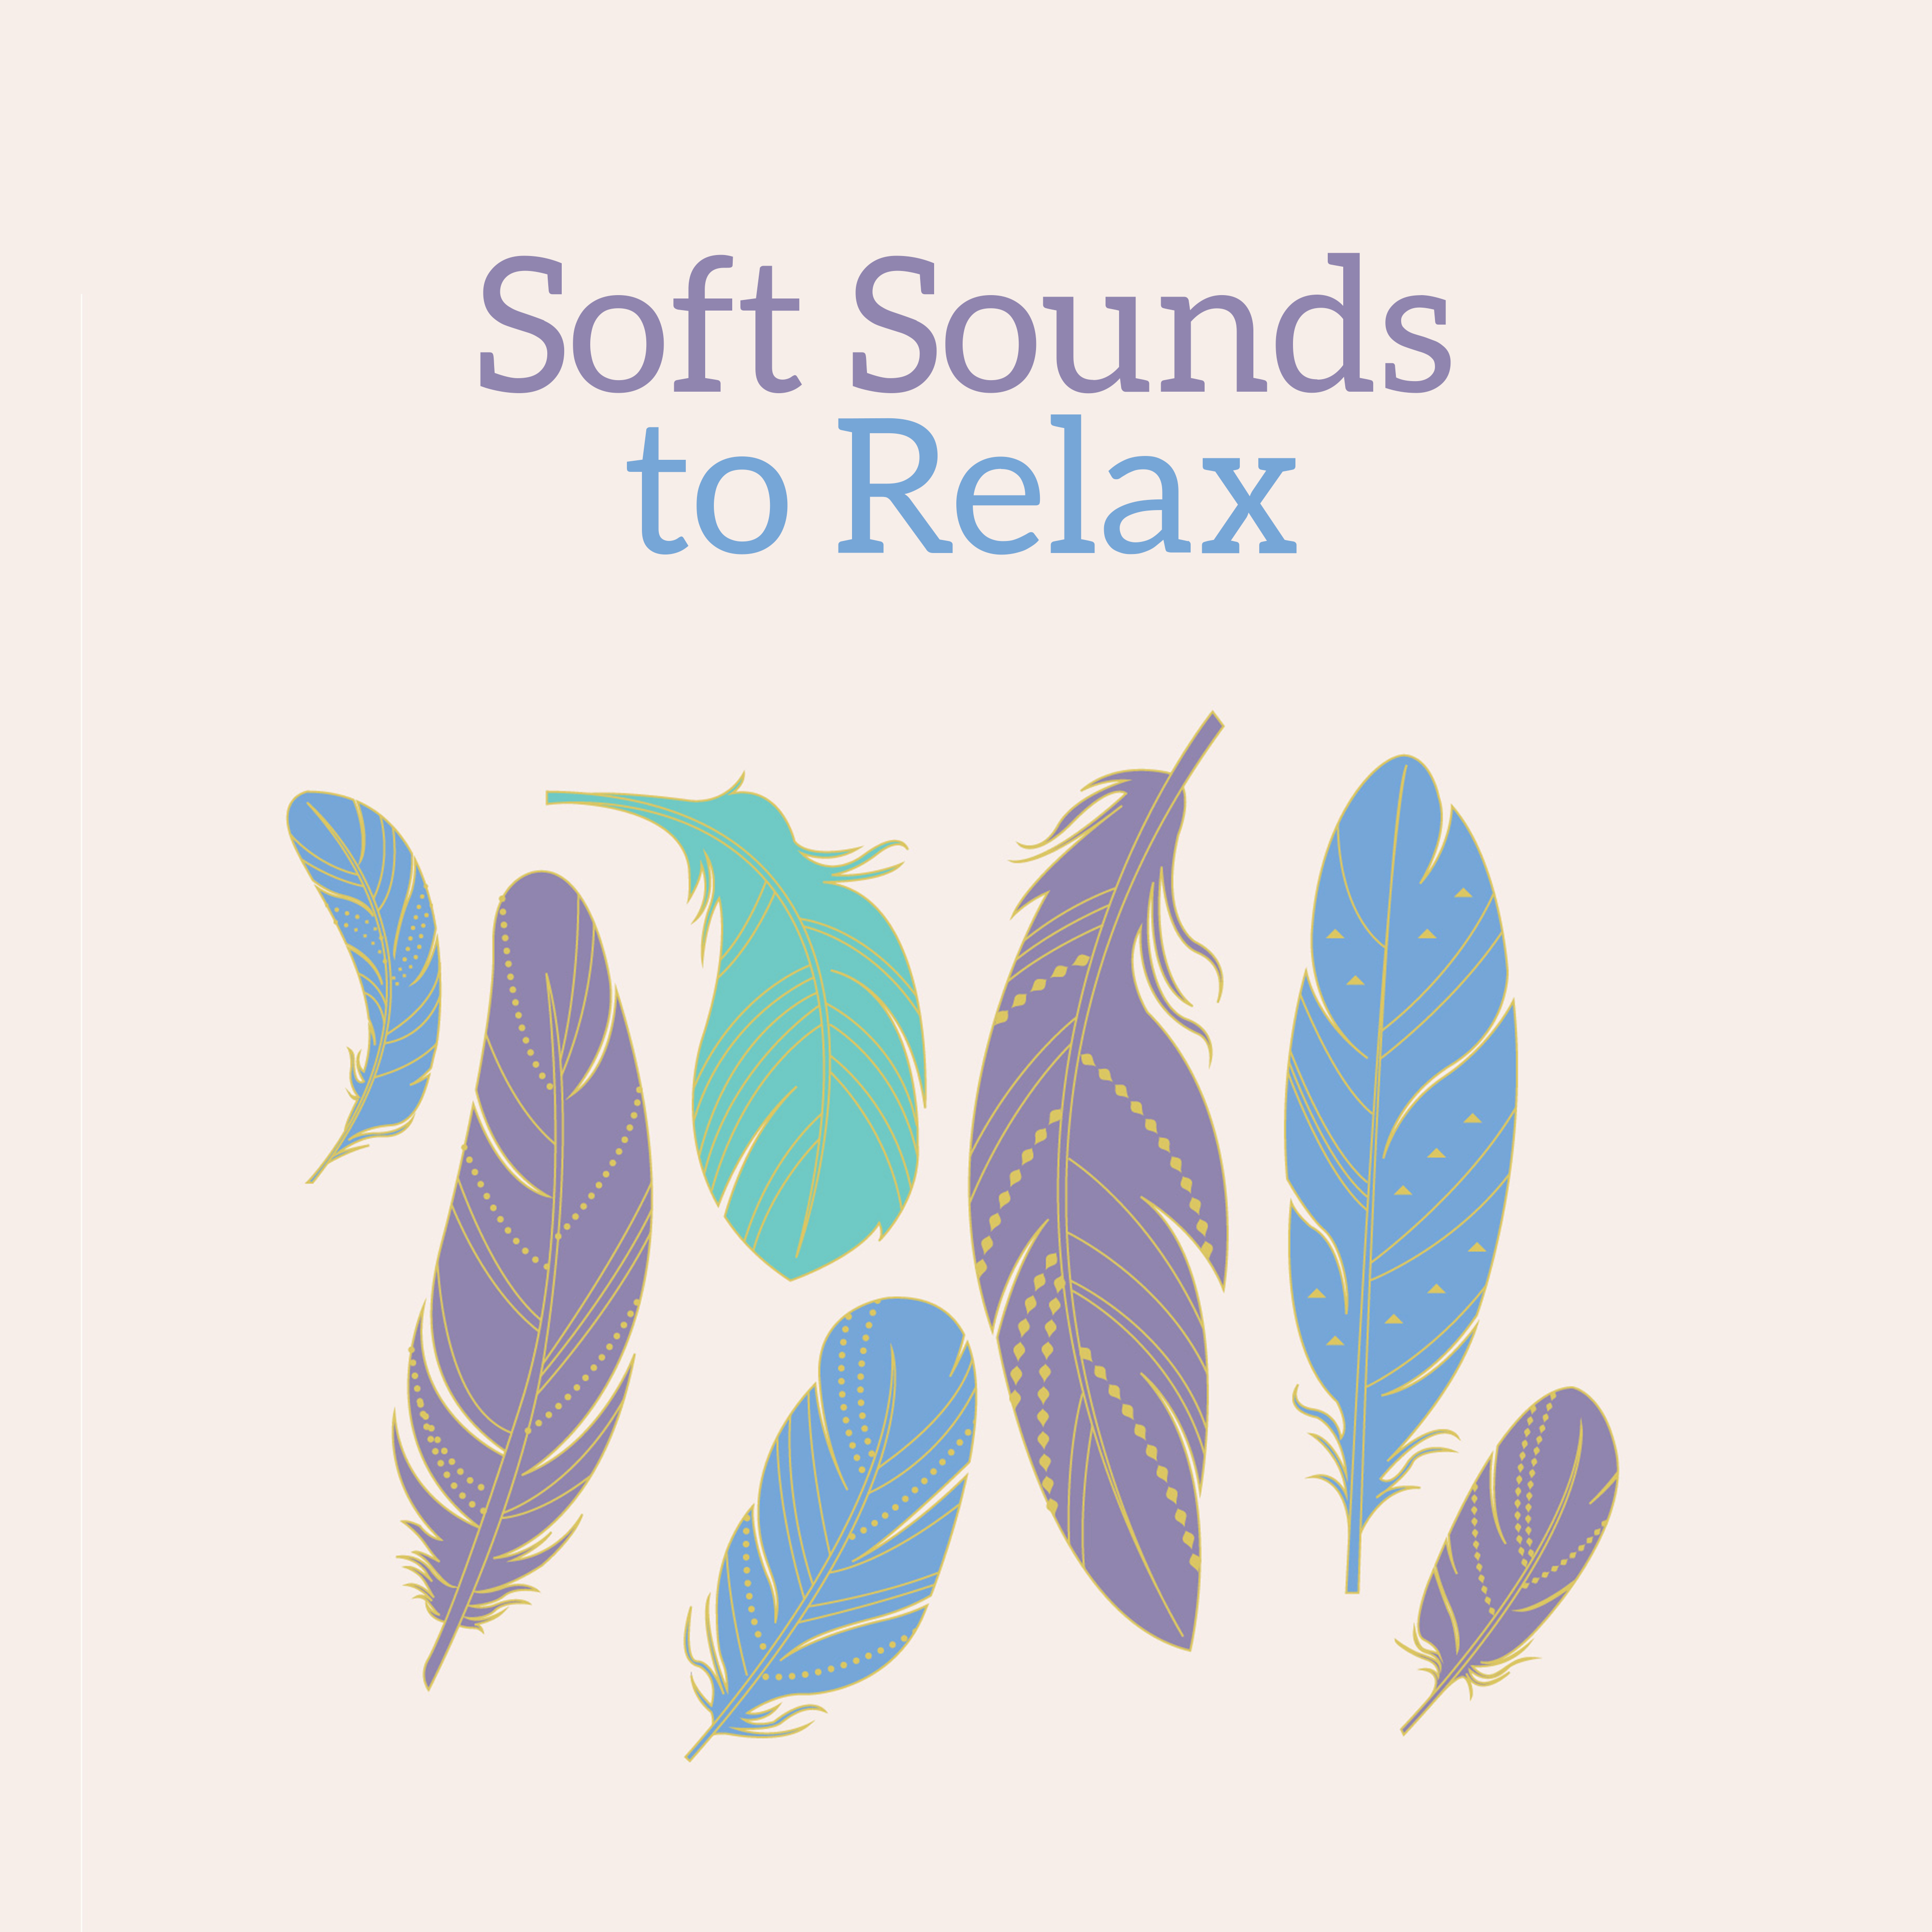 Soft Sounds to Relax